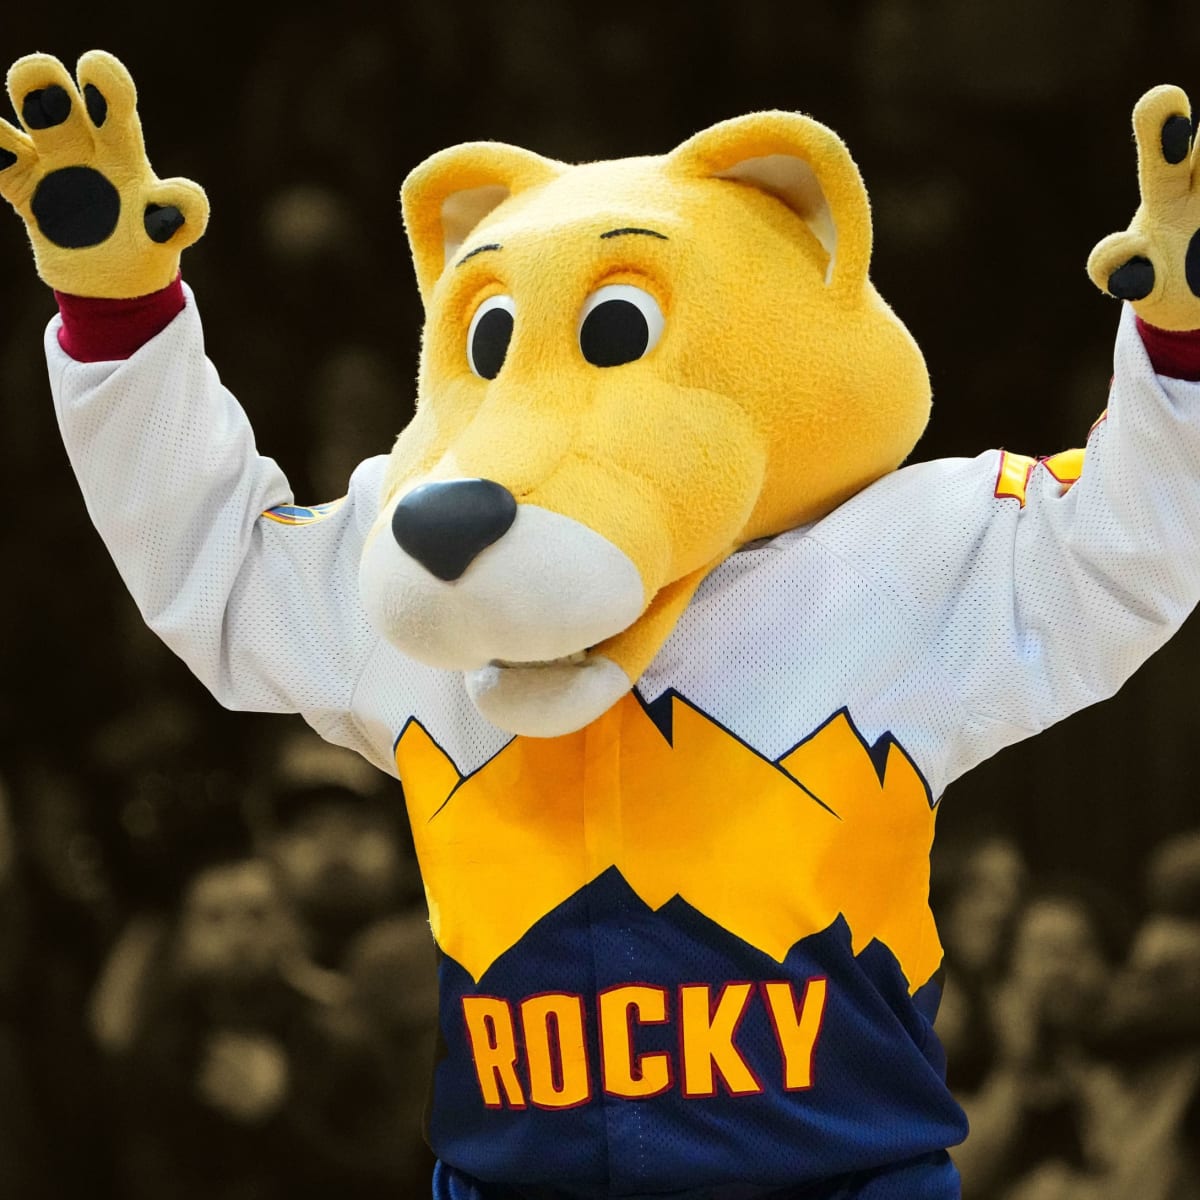 Former Monte hired as mascot for NBA's Houston Rockets